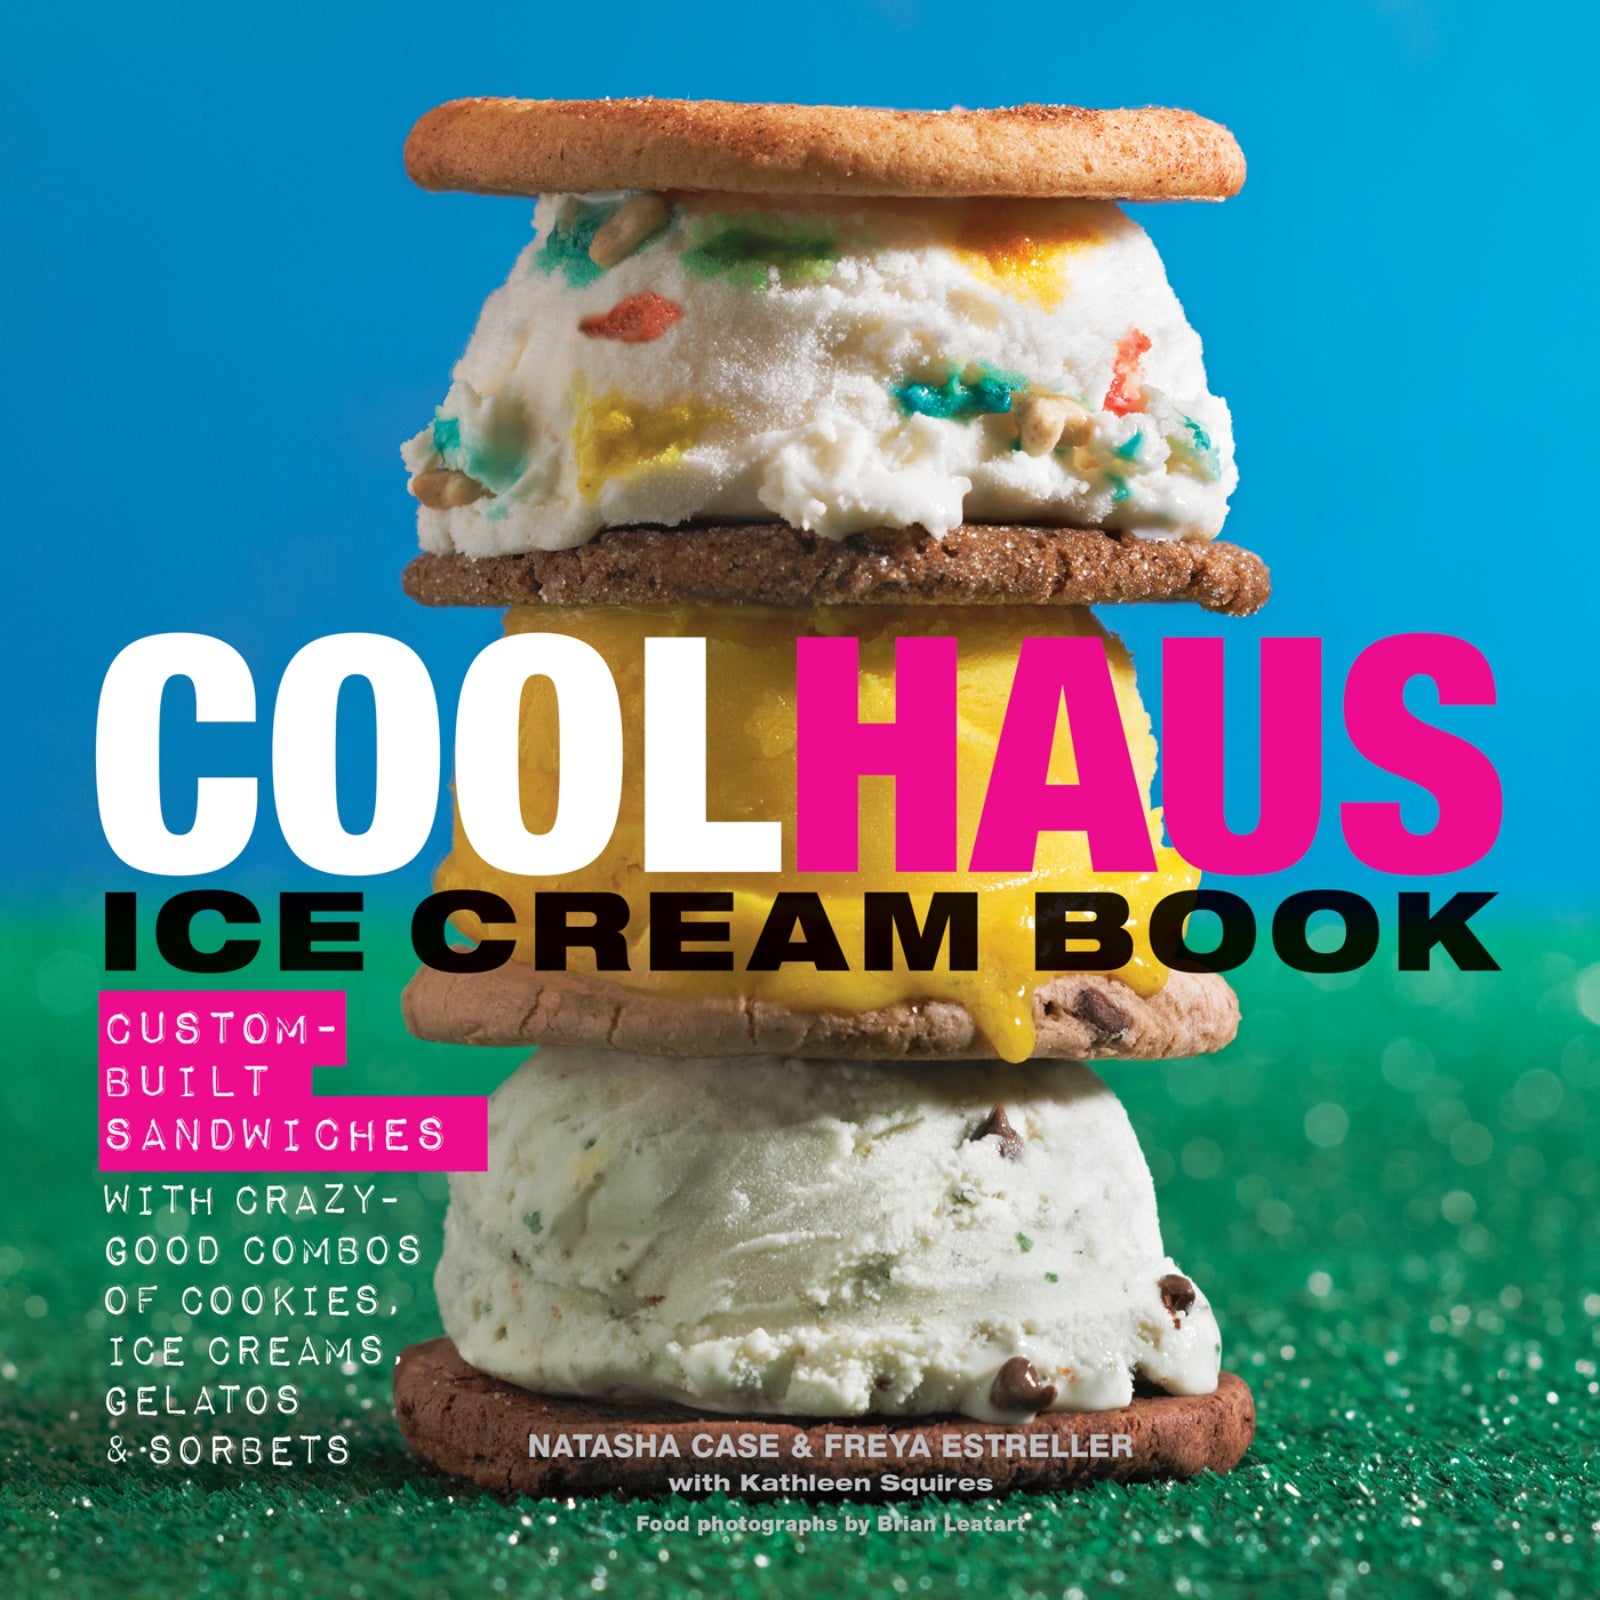 Coolhaus Ice Cream Book : Custom-Built Sandwiches with Crazy-Good Combos of Cookies, Ice Creams, Gelatos, and Sorbets